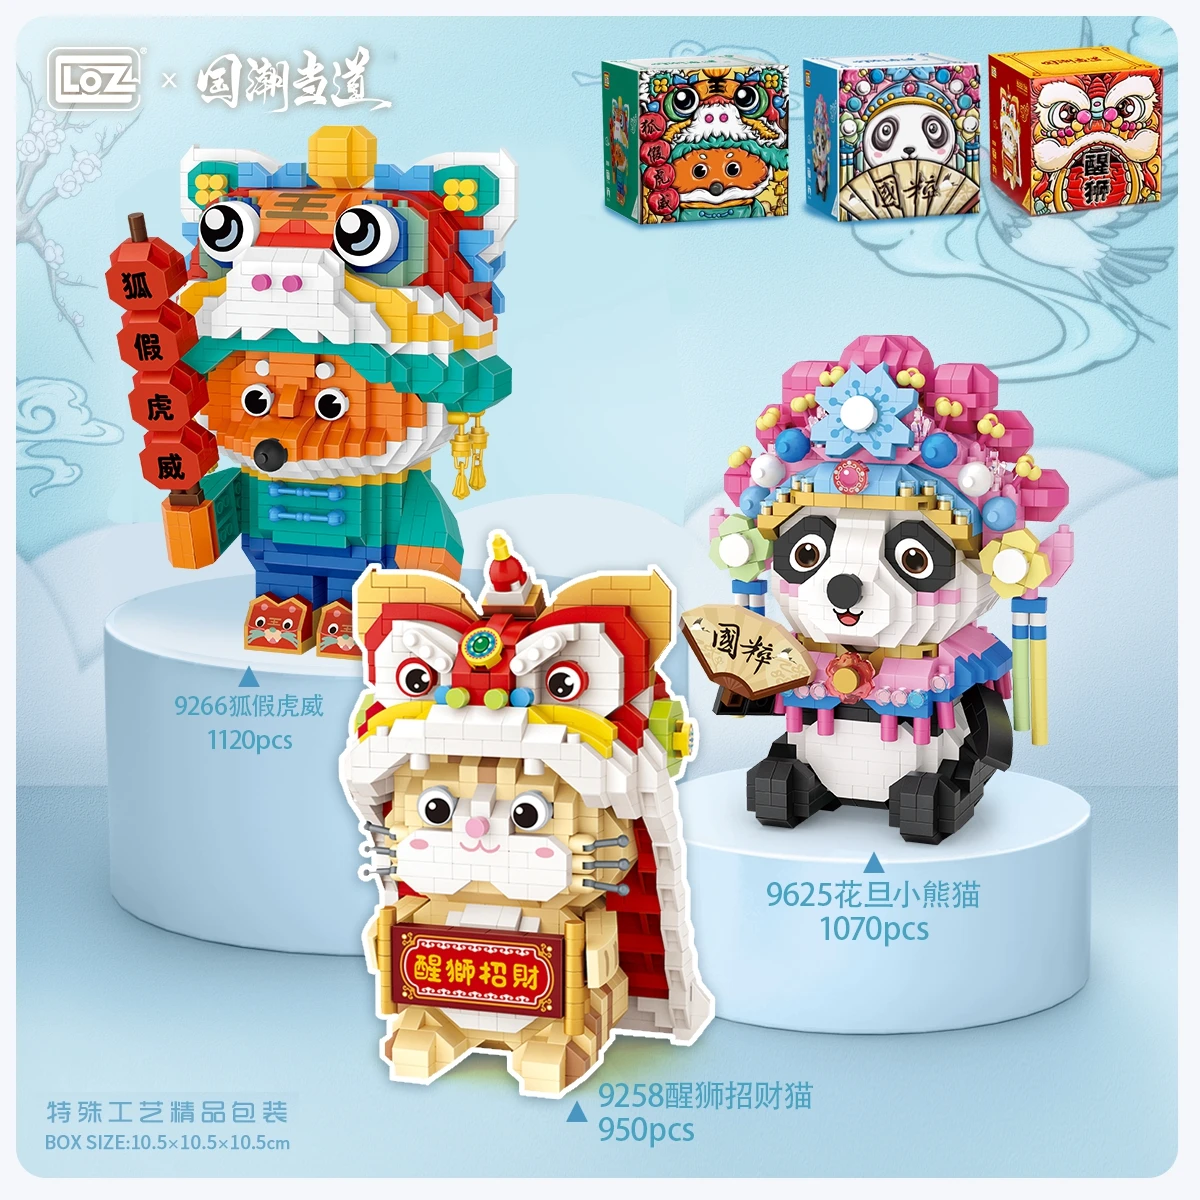 

1070pcs+ LOZ MINI Building Blocks creative Chinese Tradition Culture/spring festival/New Year's collection toys/Panda